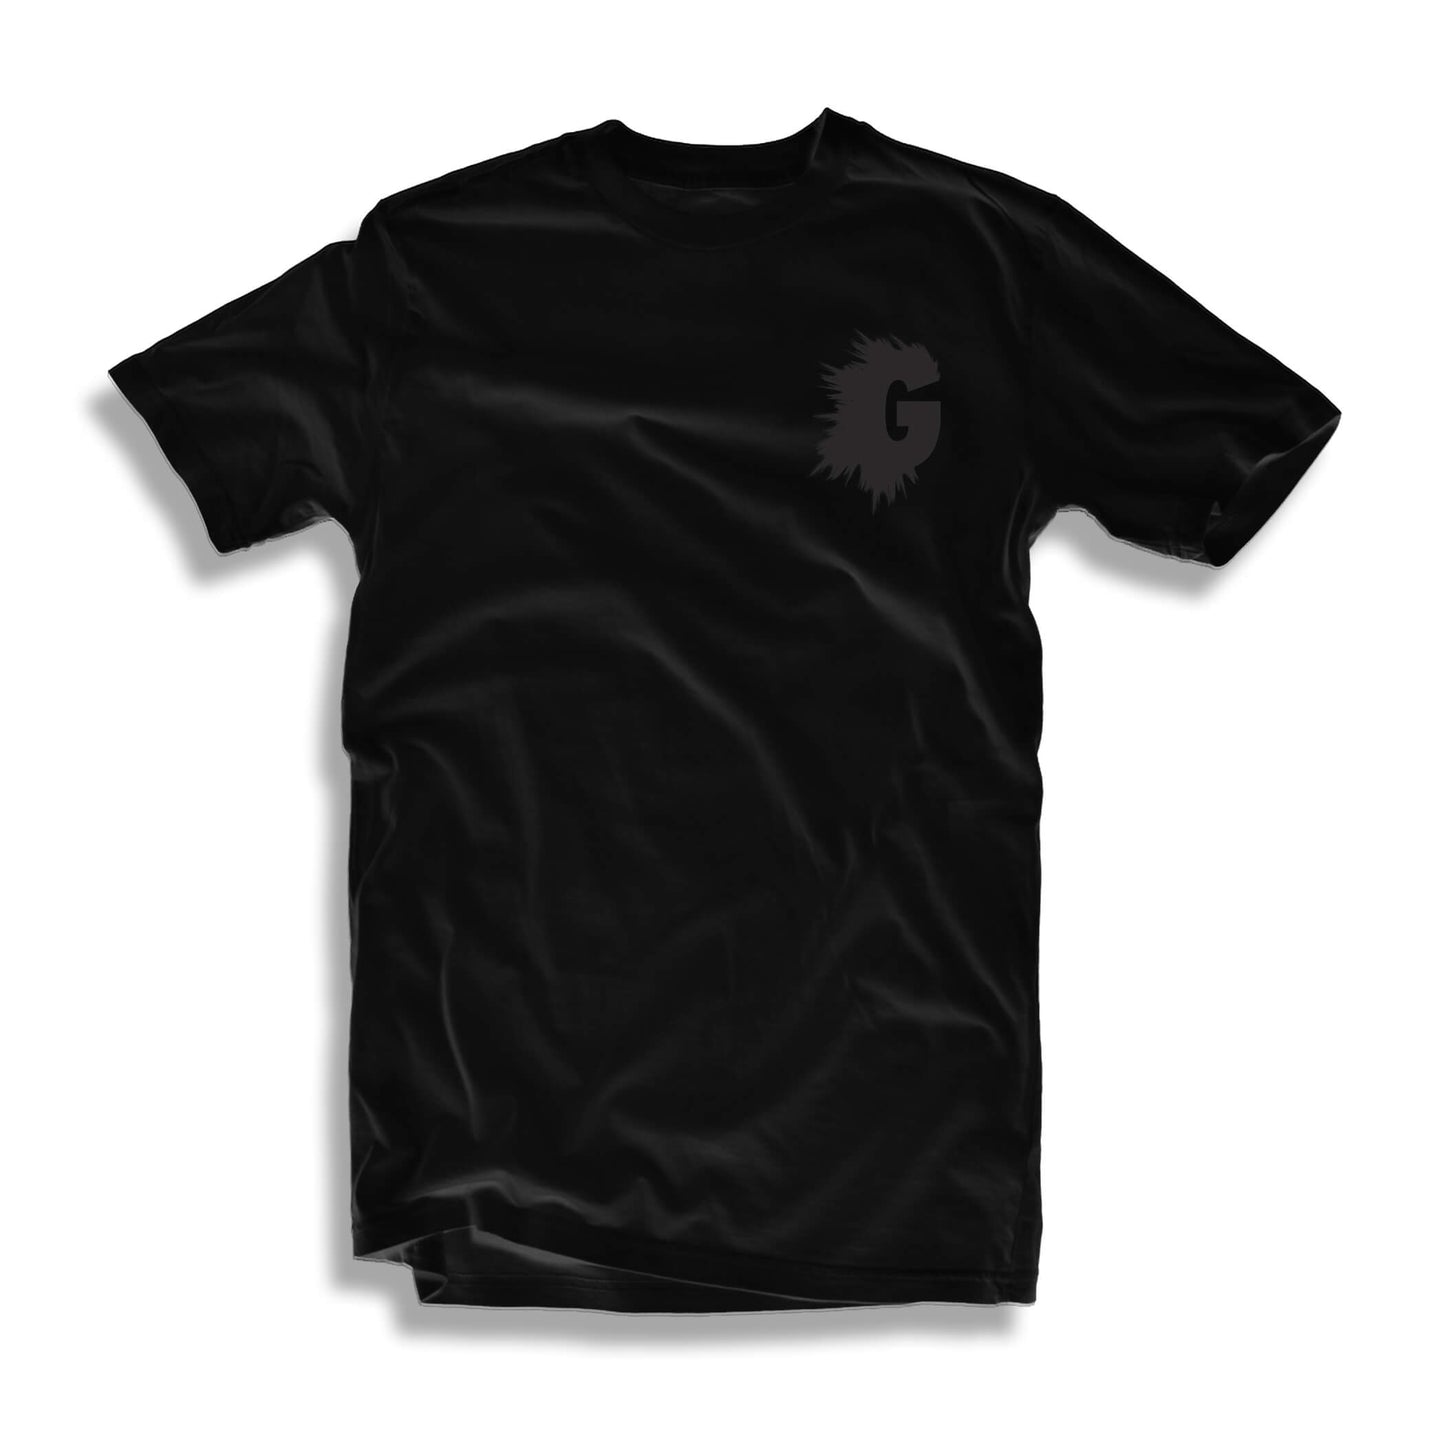 CLASSIC G LOGO T-SHIRT (MULTIPLE COLORWAYS) *ALWAYS ON SALE